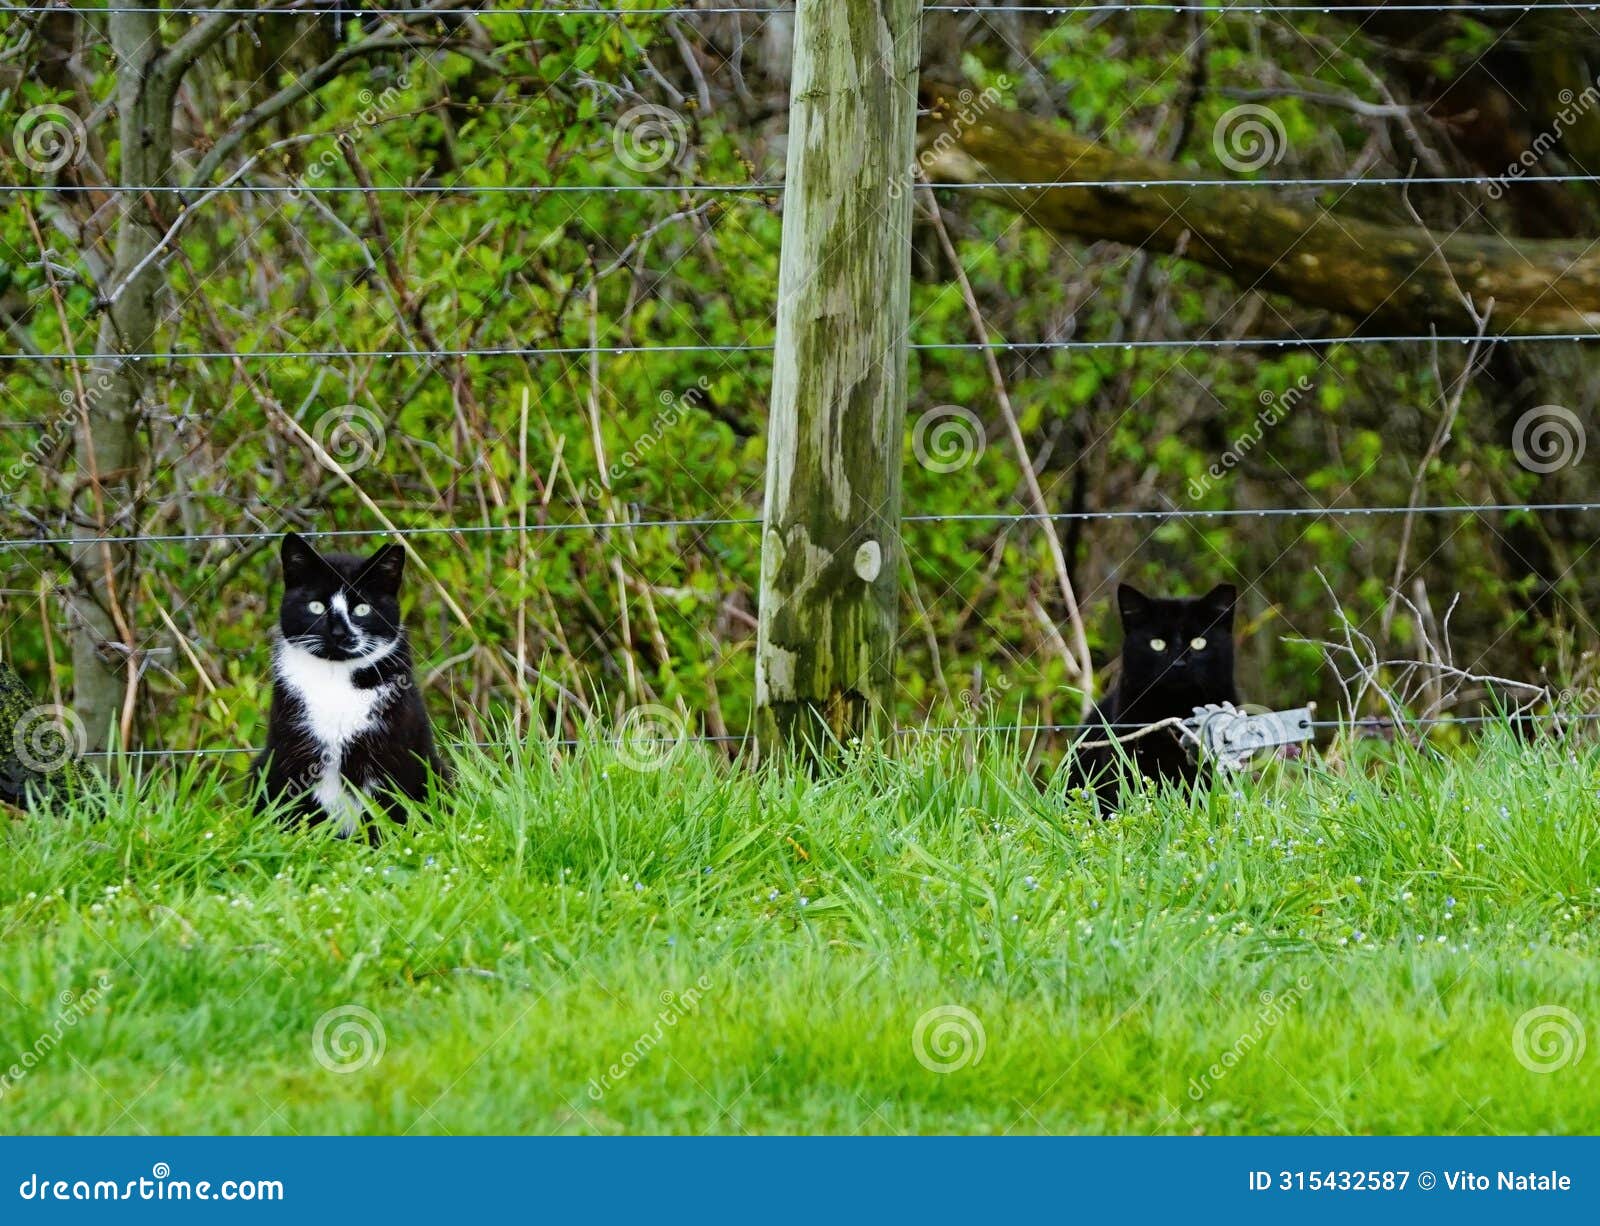 cats out on a farm roaming the field,